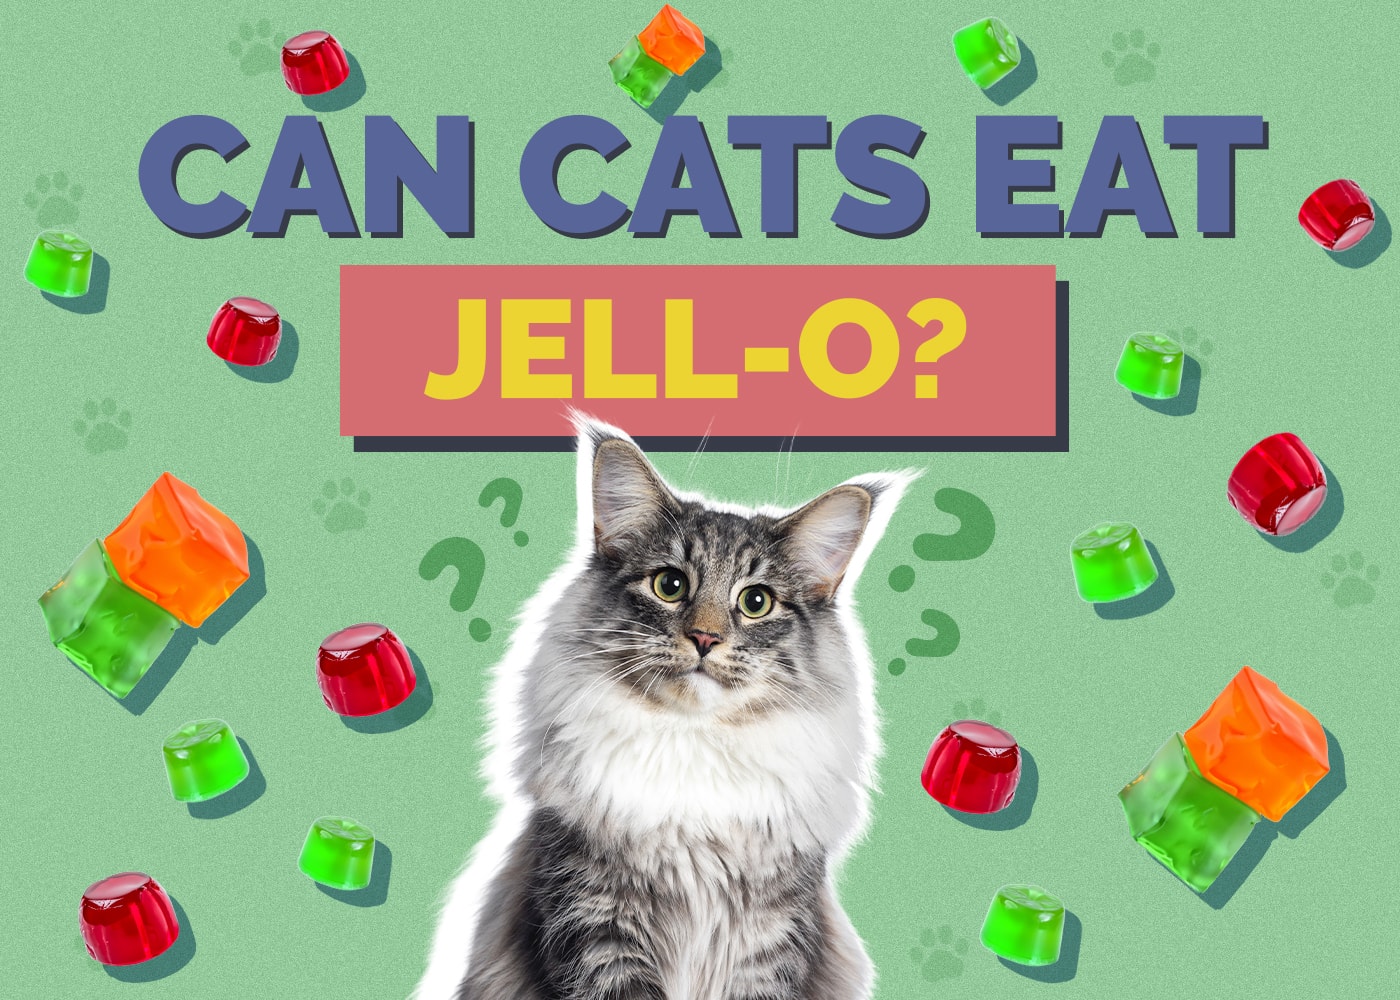 Can Cats Eat jellos